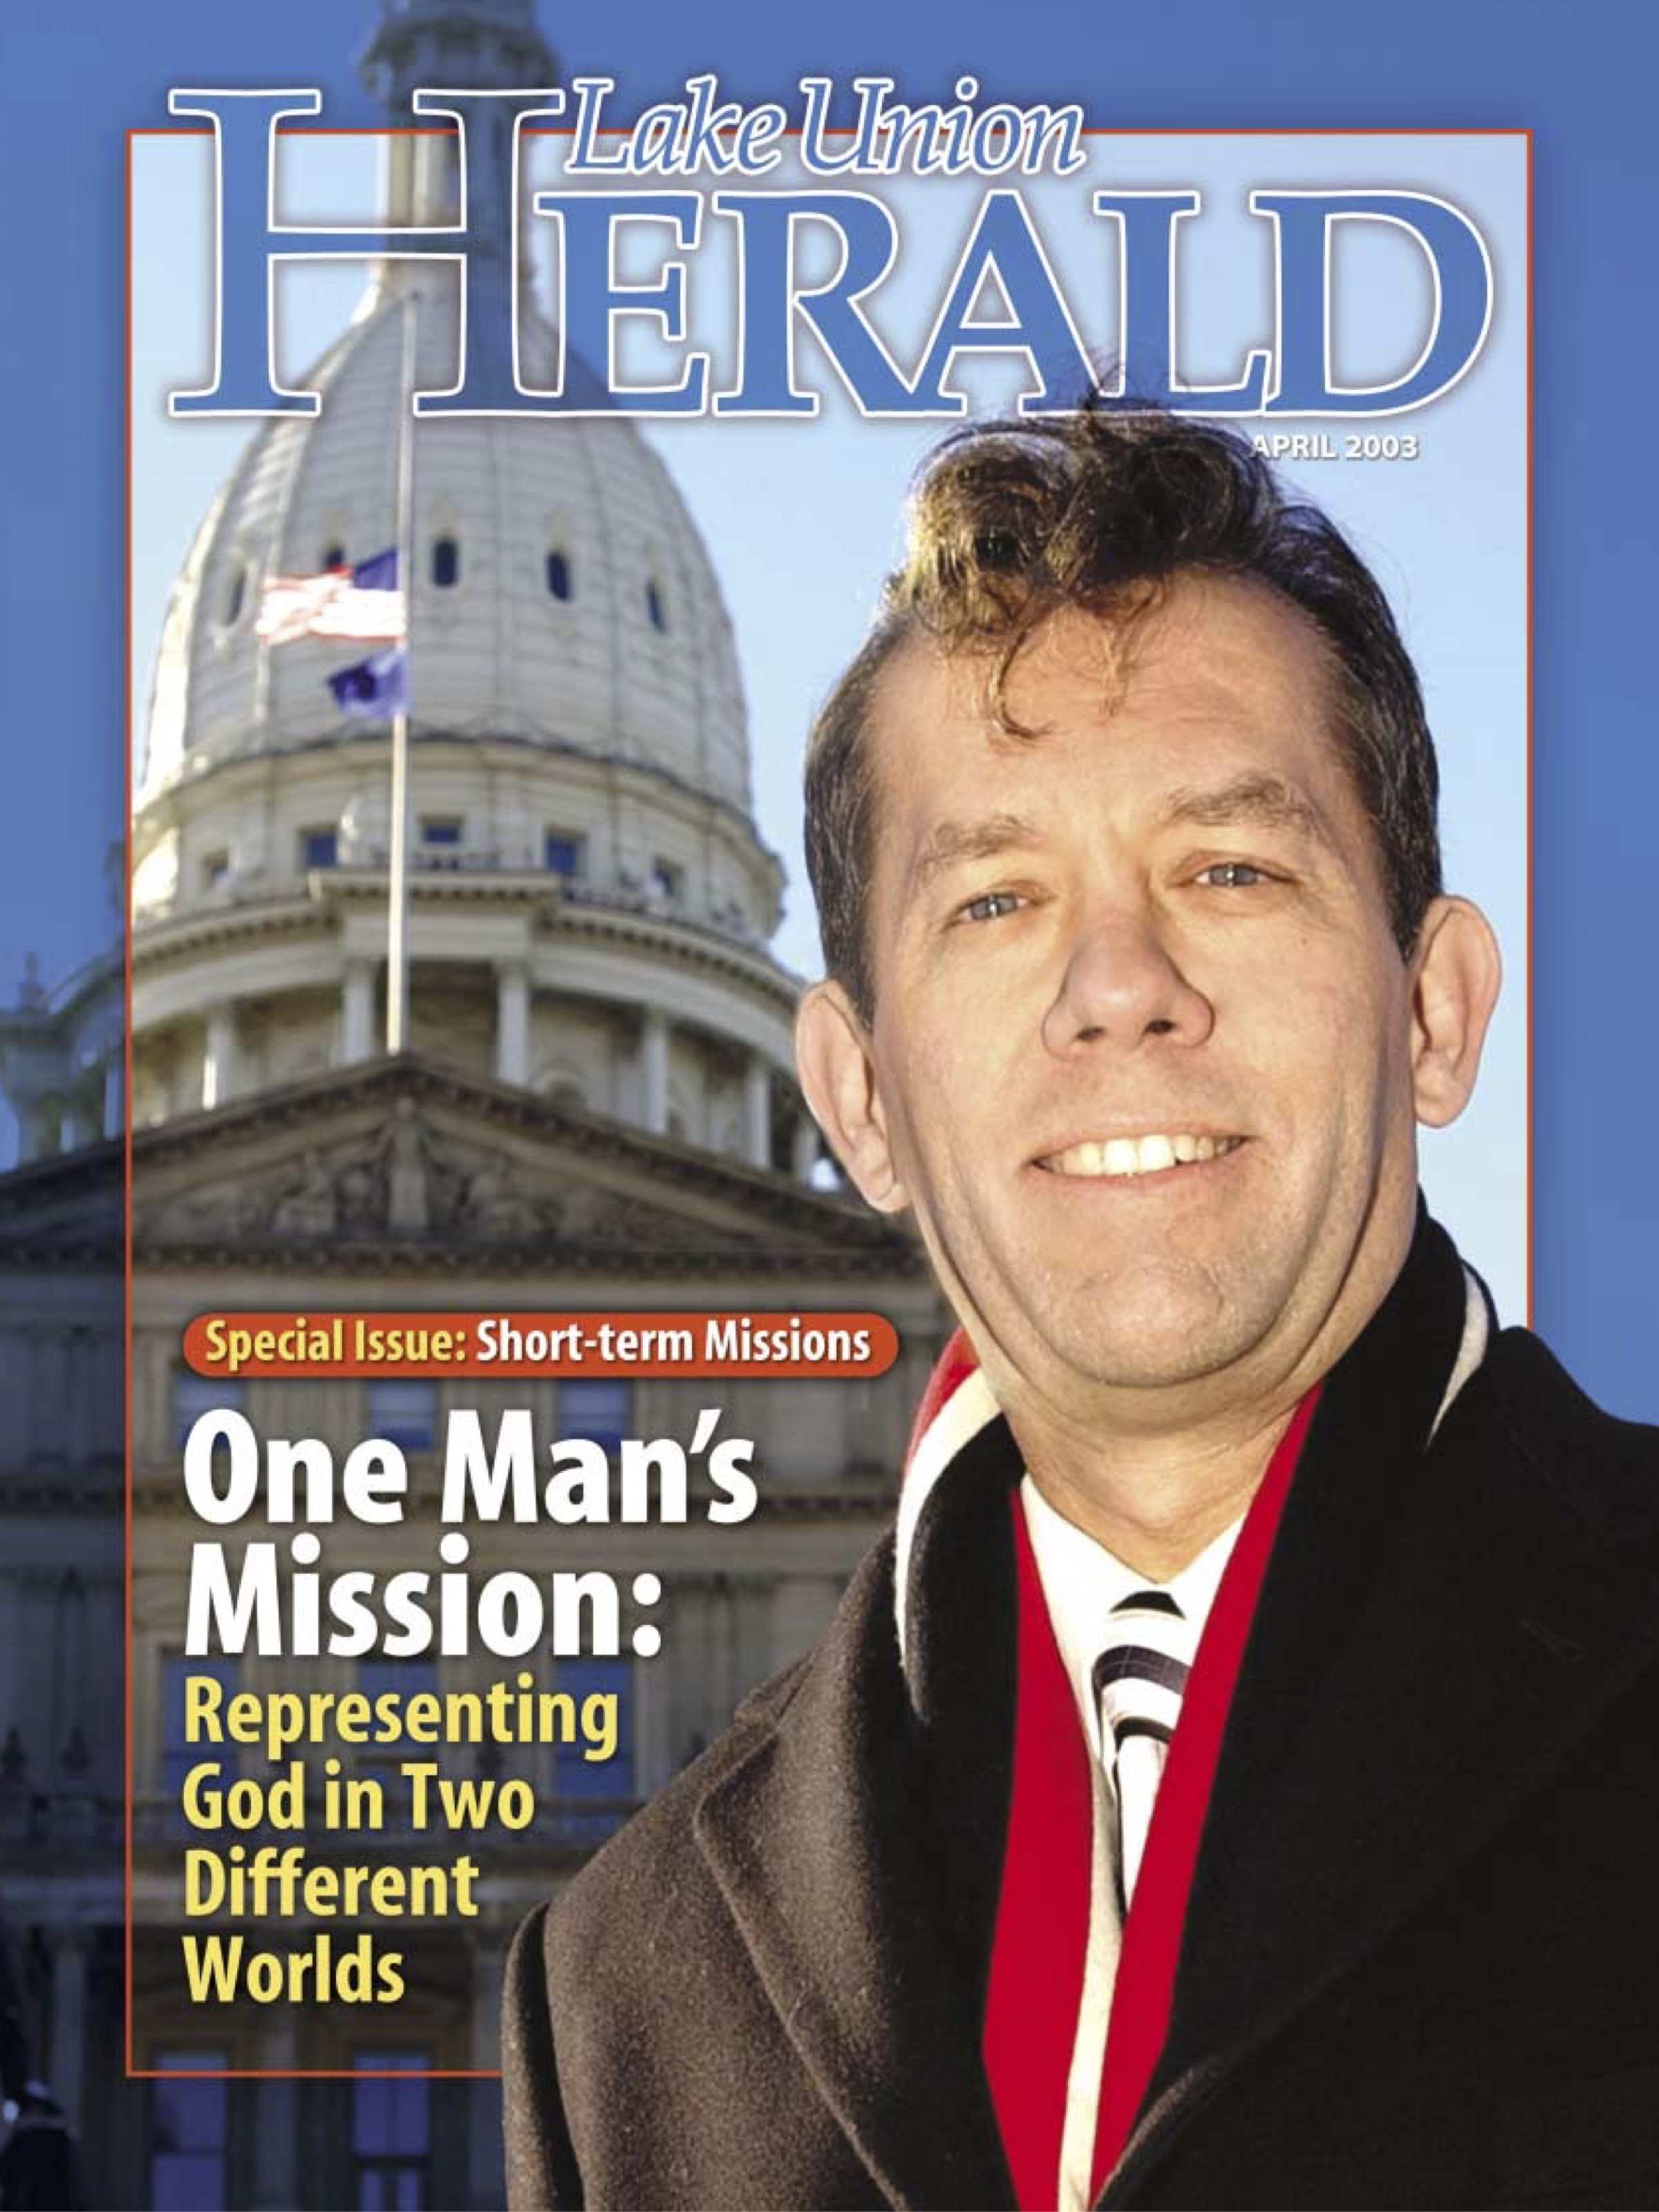 April 2003 Issue